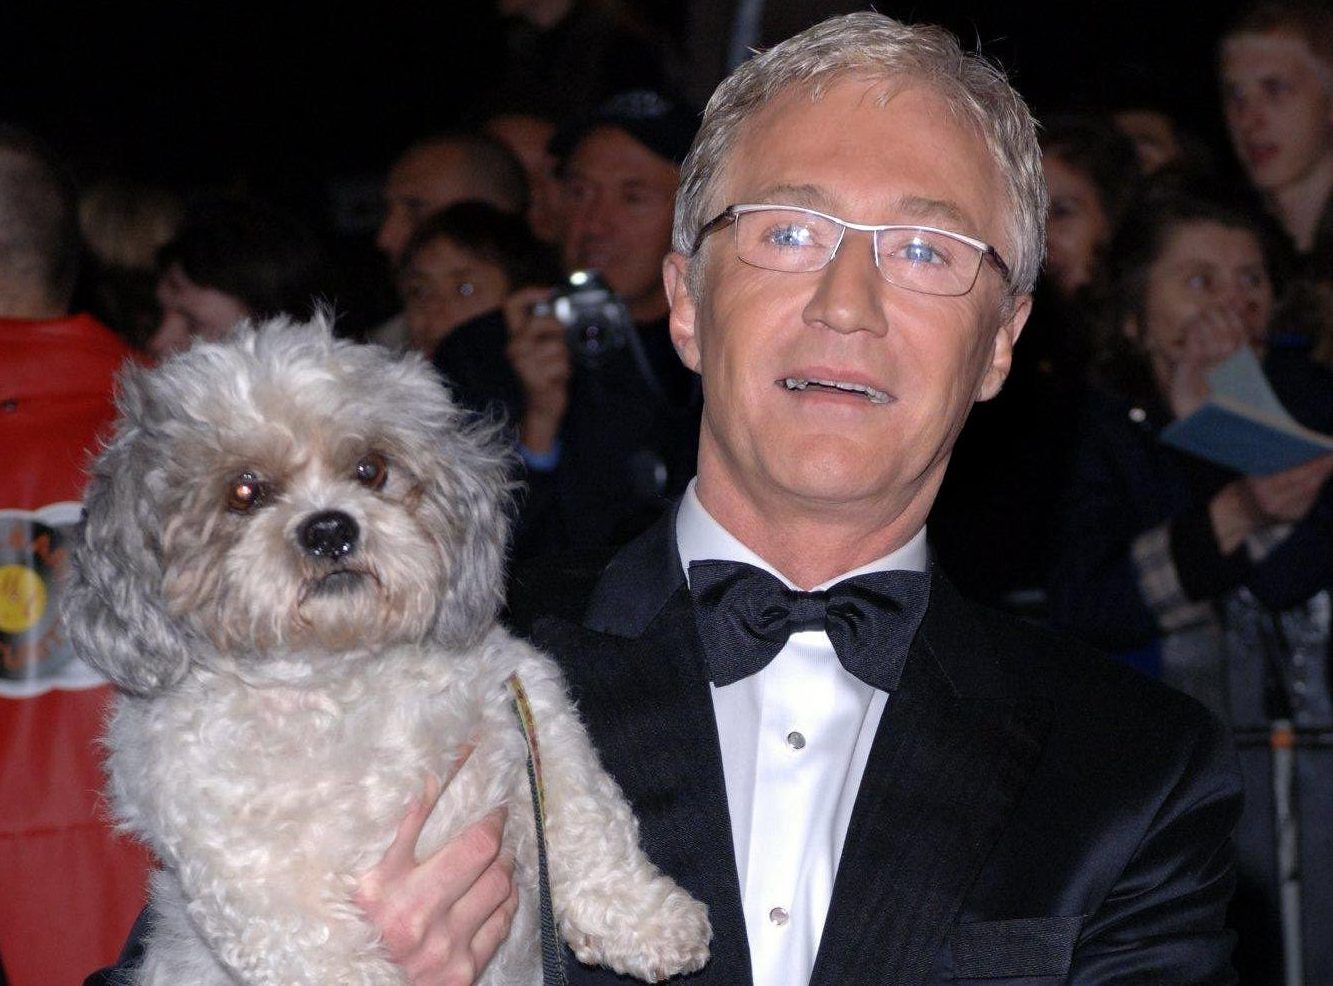 Paul O'Grady with his dog Buster (Steve Parsons/PA)